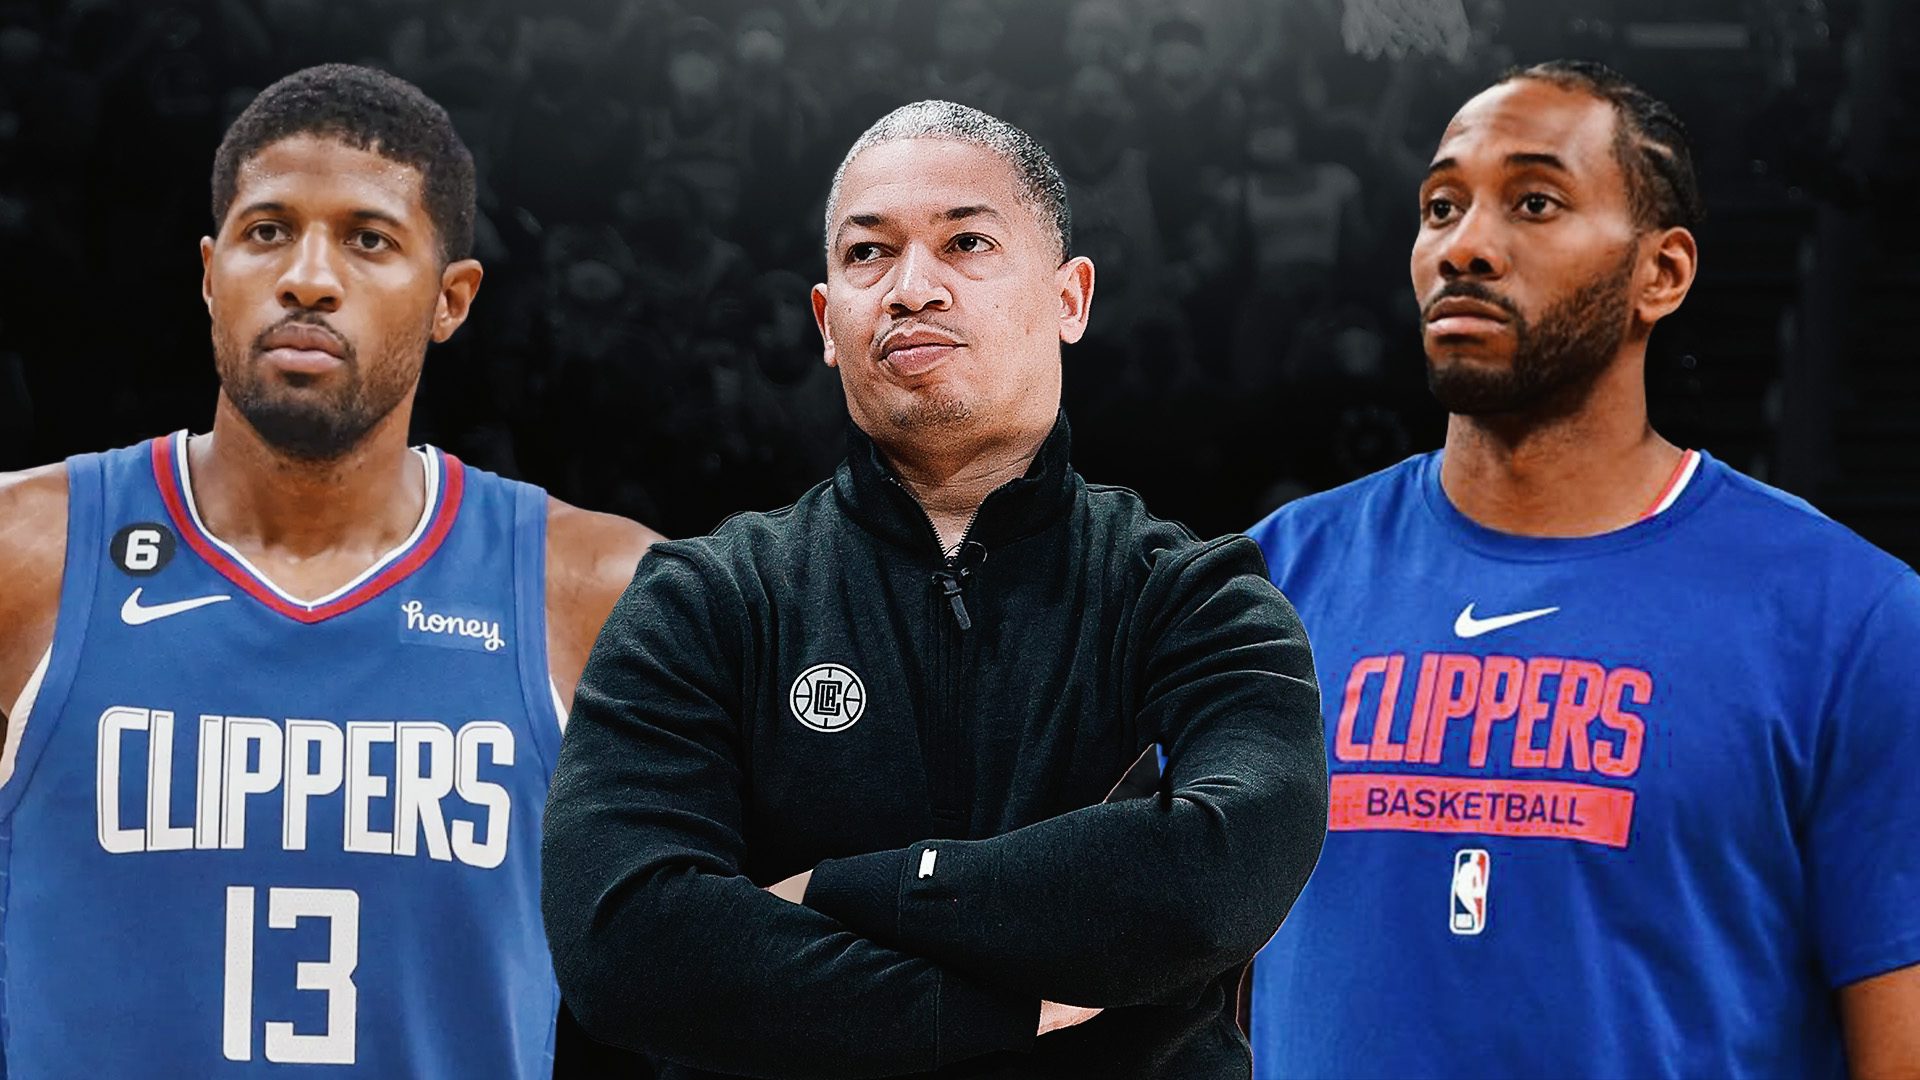 Anonymous Media Member Exposes Toxic Culture at Clippers On Twitter